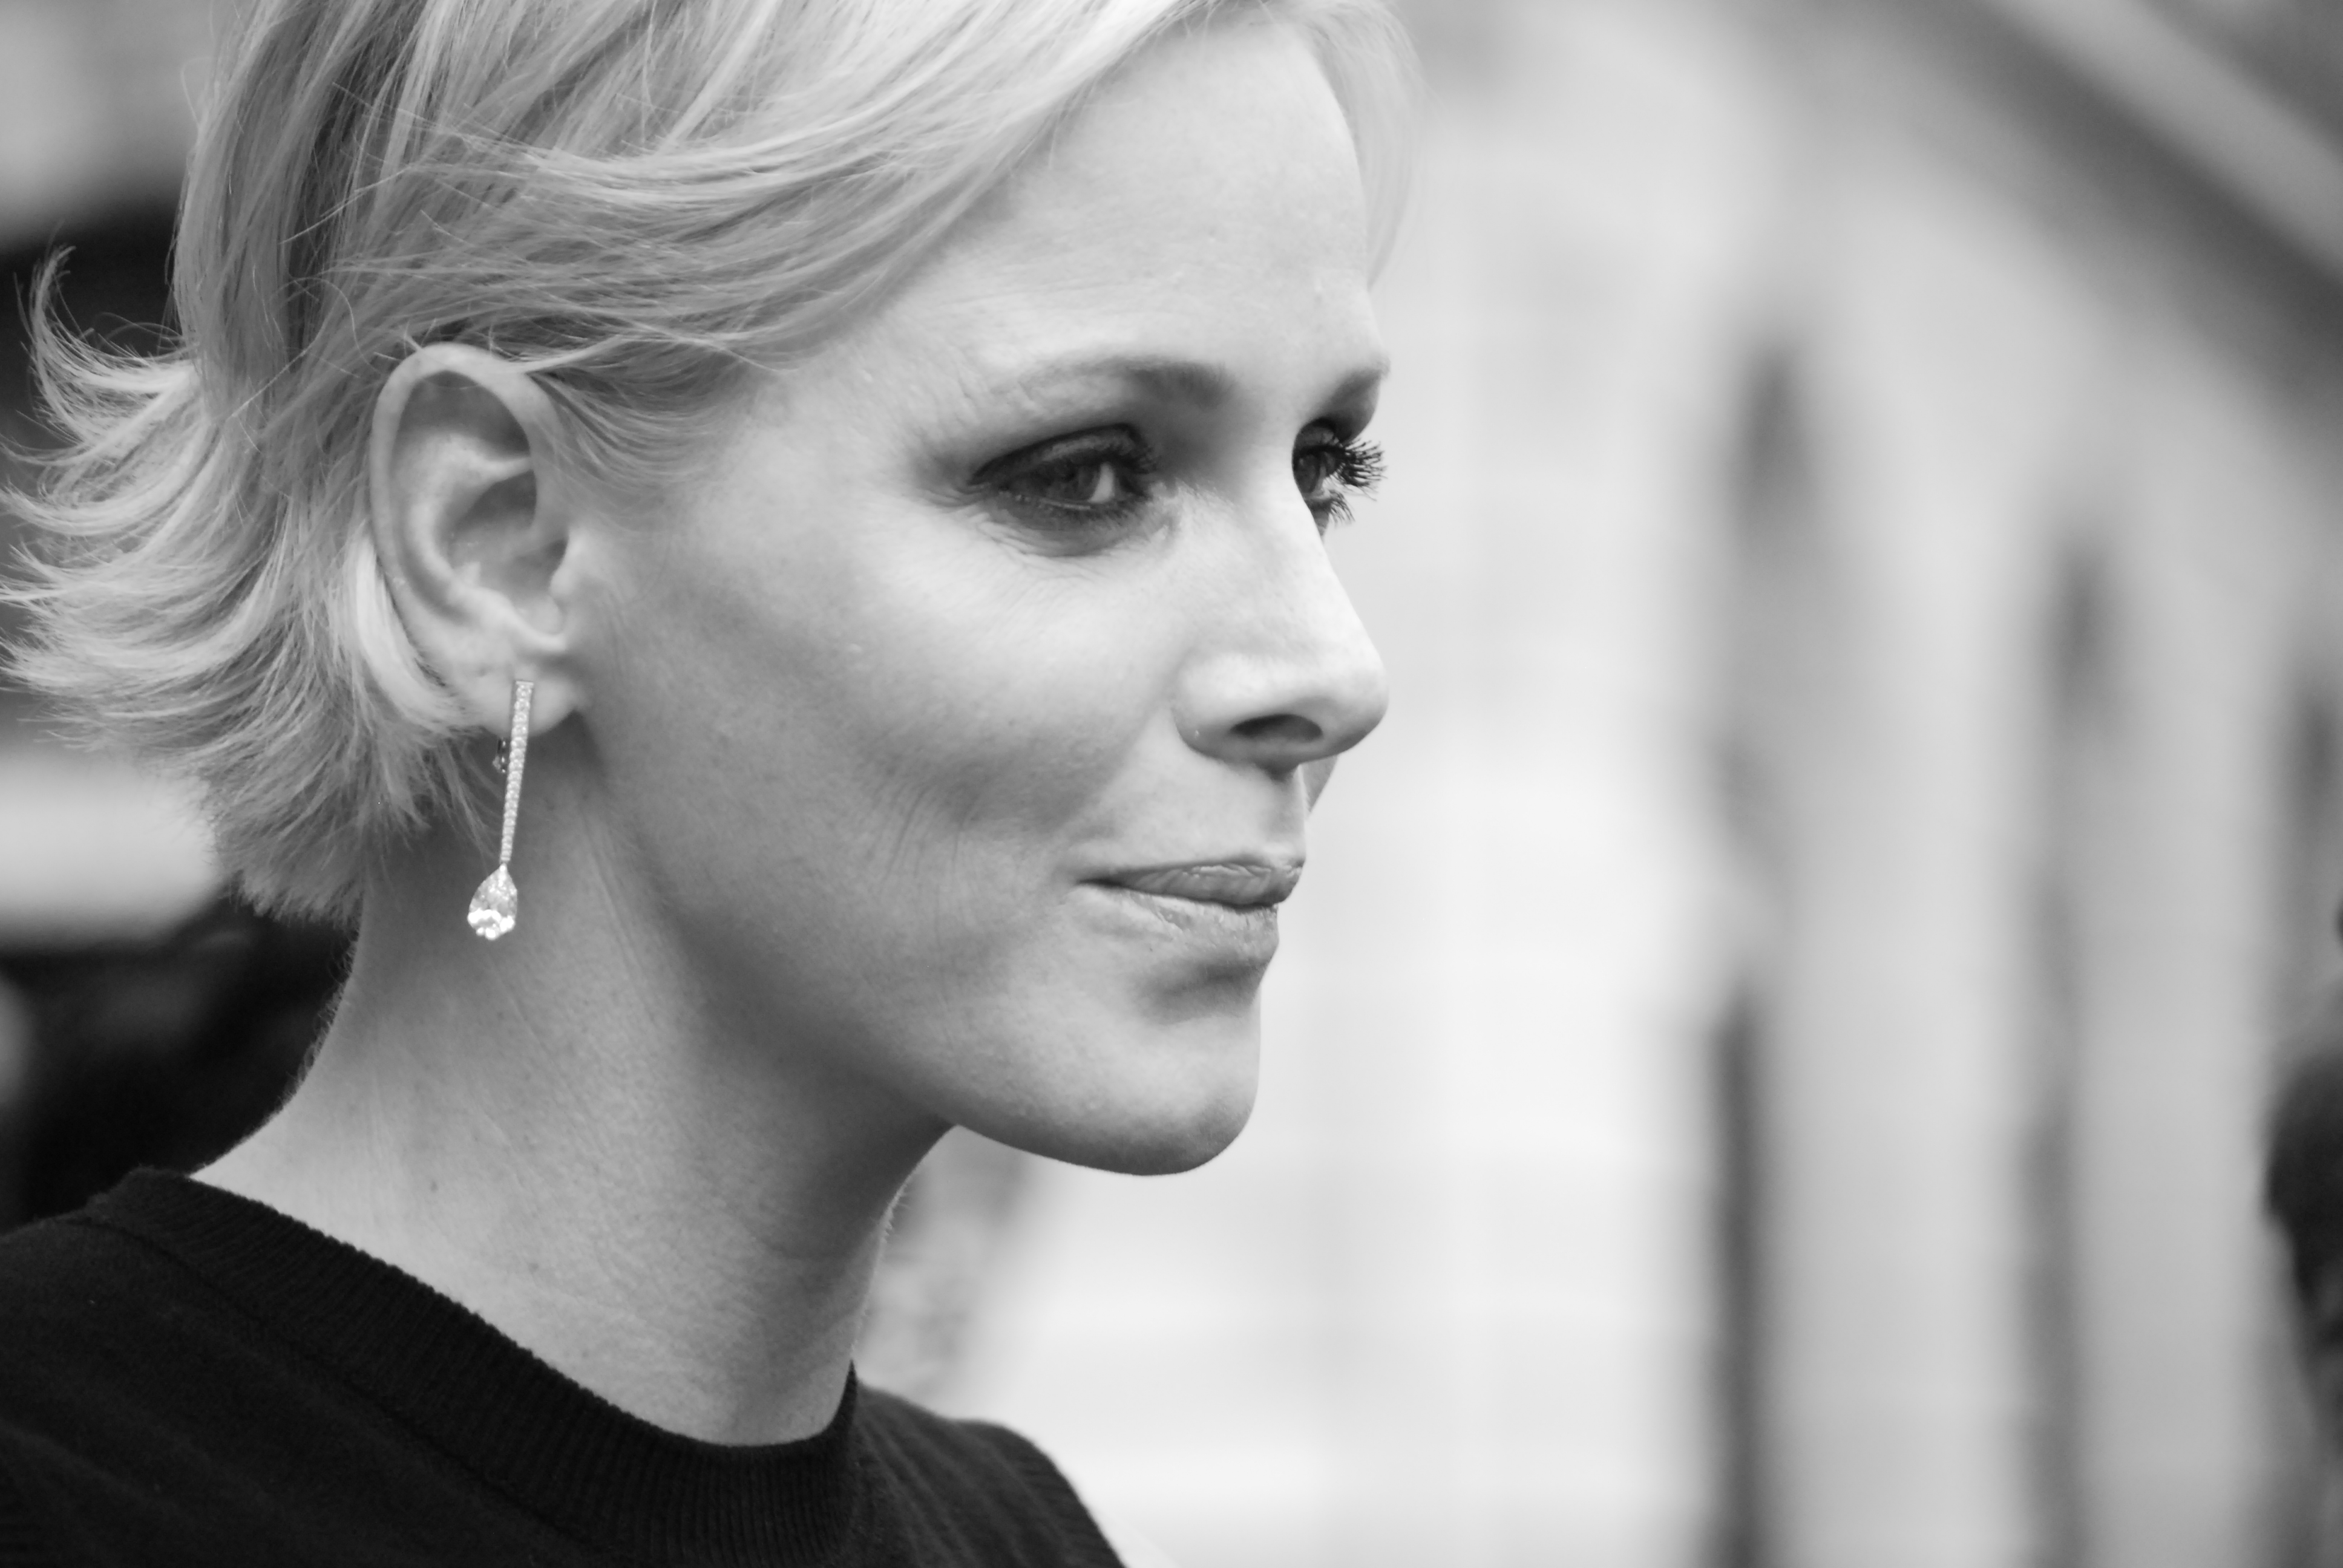 The Monaco tradition which brought Princess Charlene to tears - Royal Central